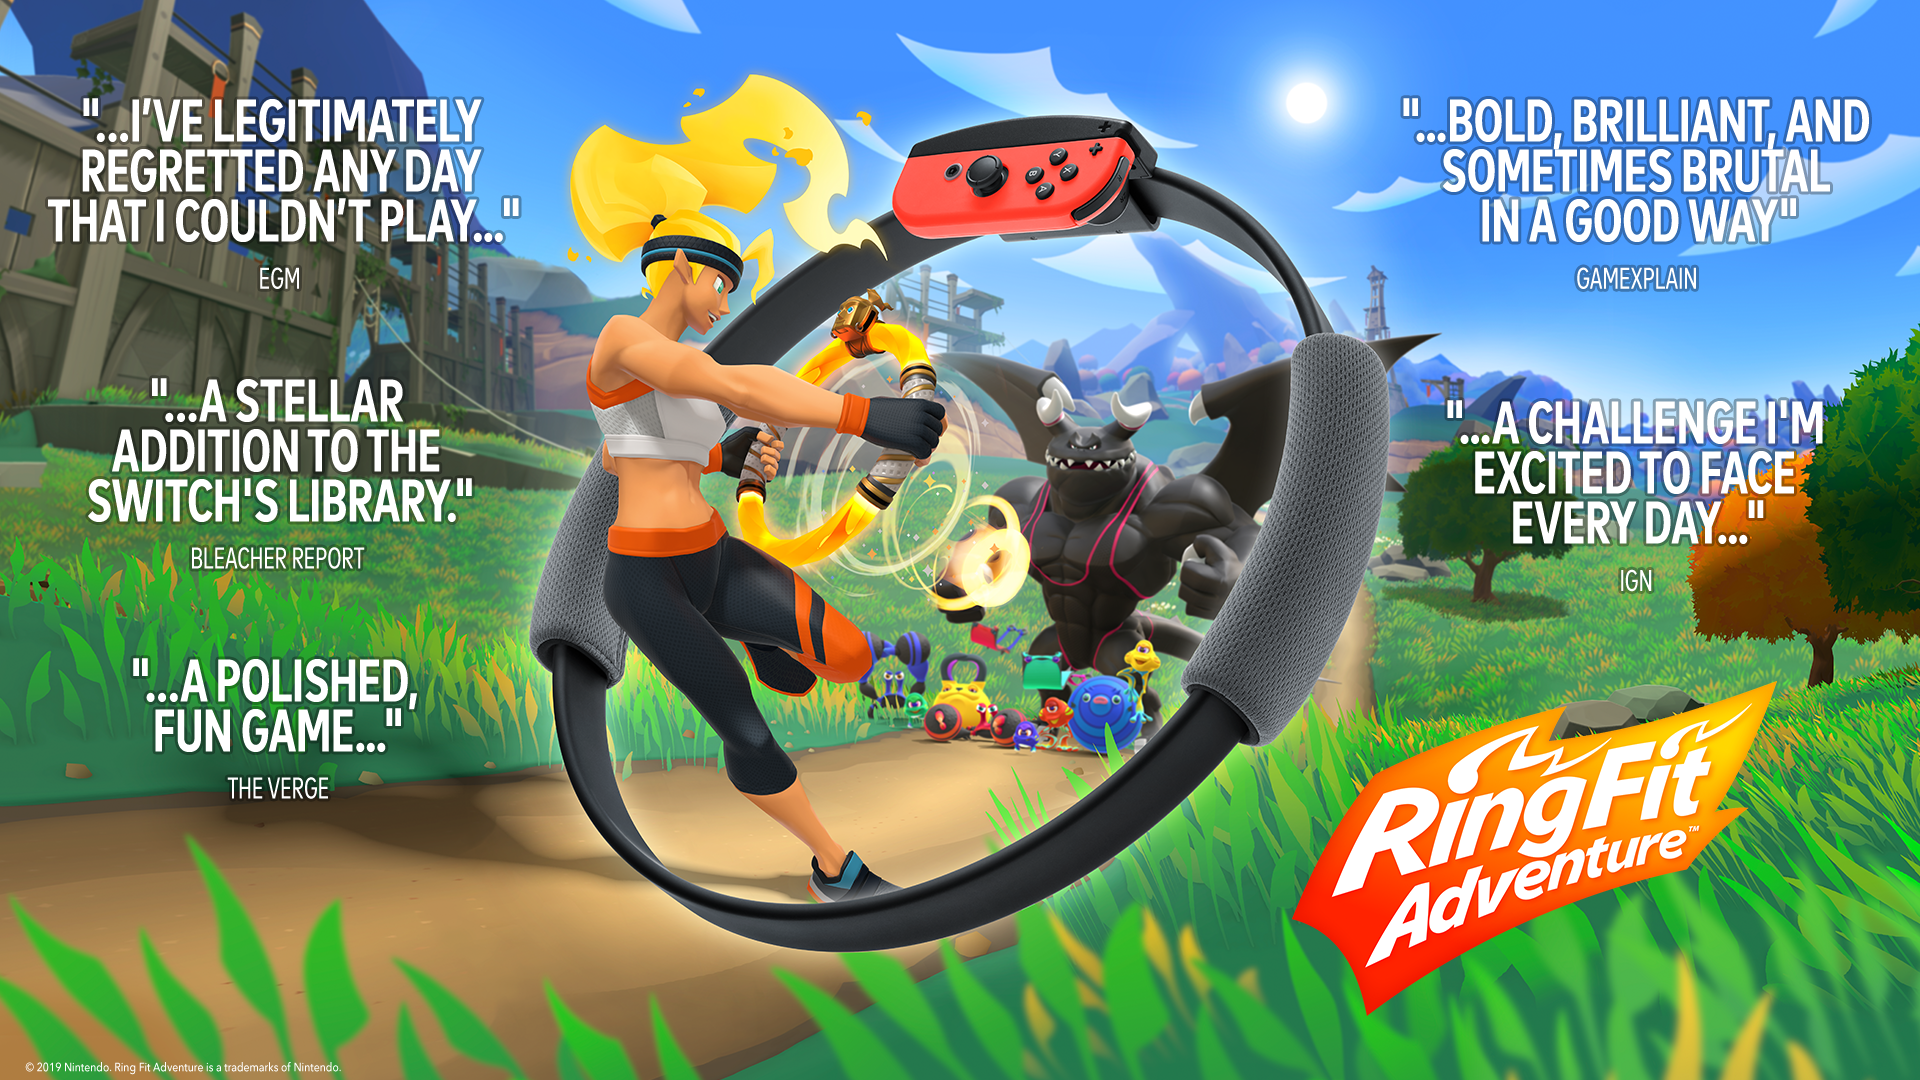 This Nintendo Switch & Ring Fit Adventure Bundle is enough to get anyone  moving - save more than £50!